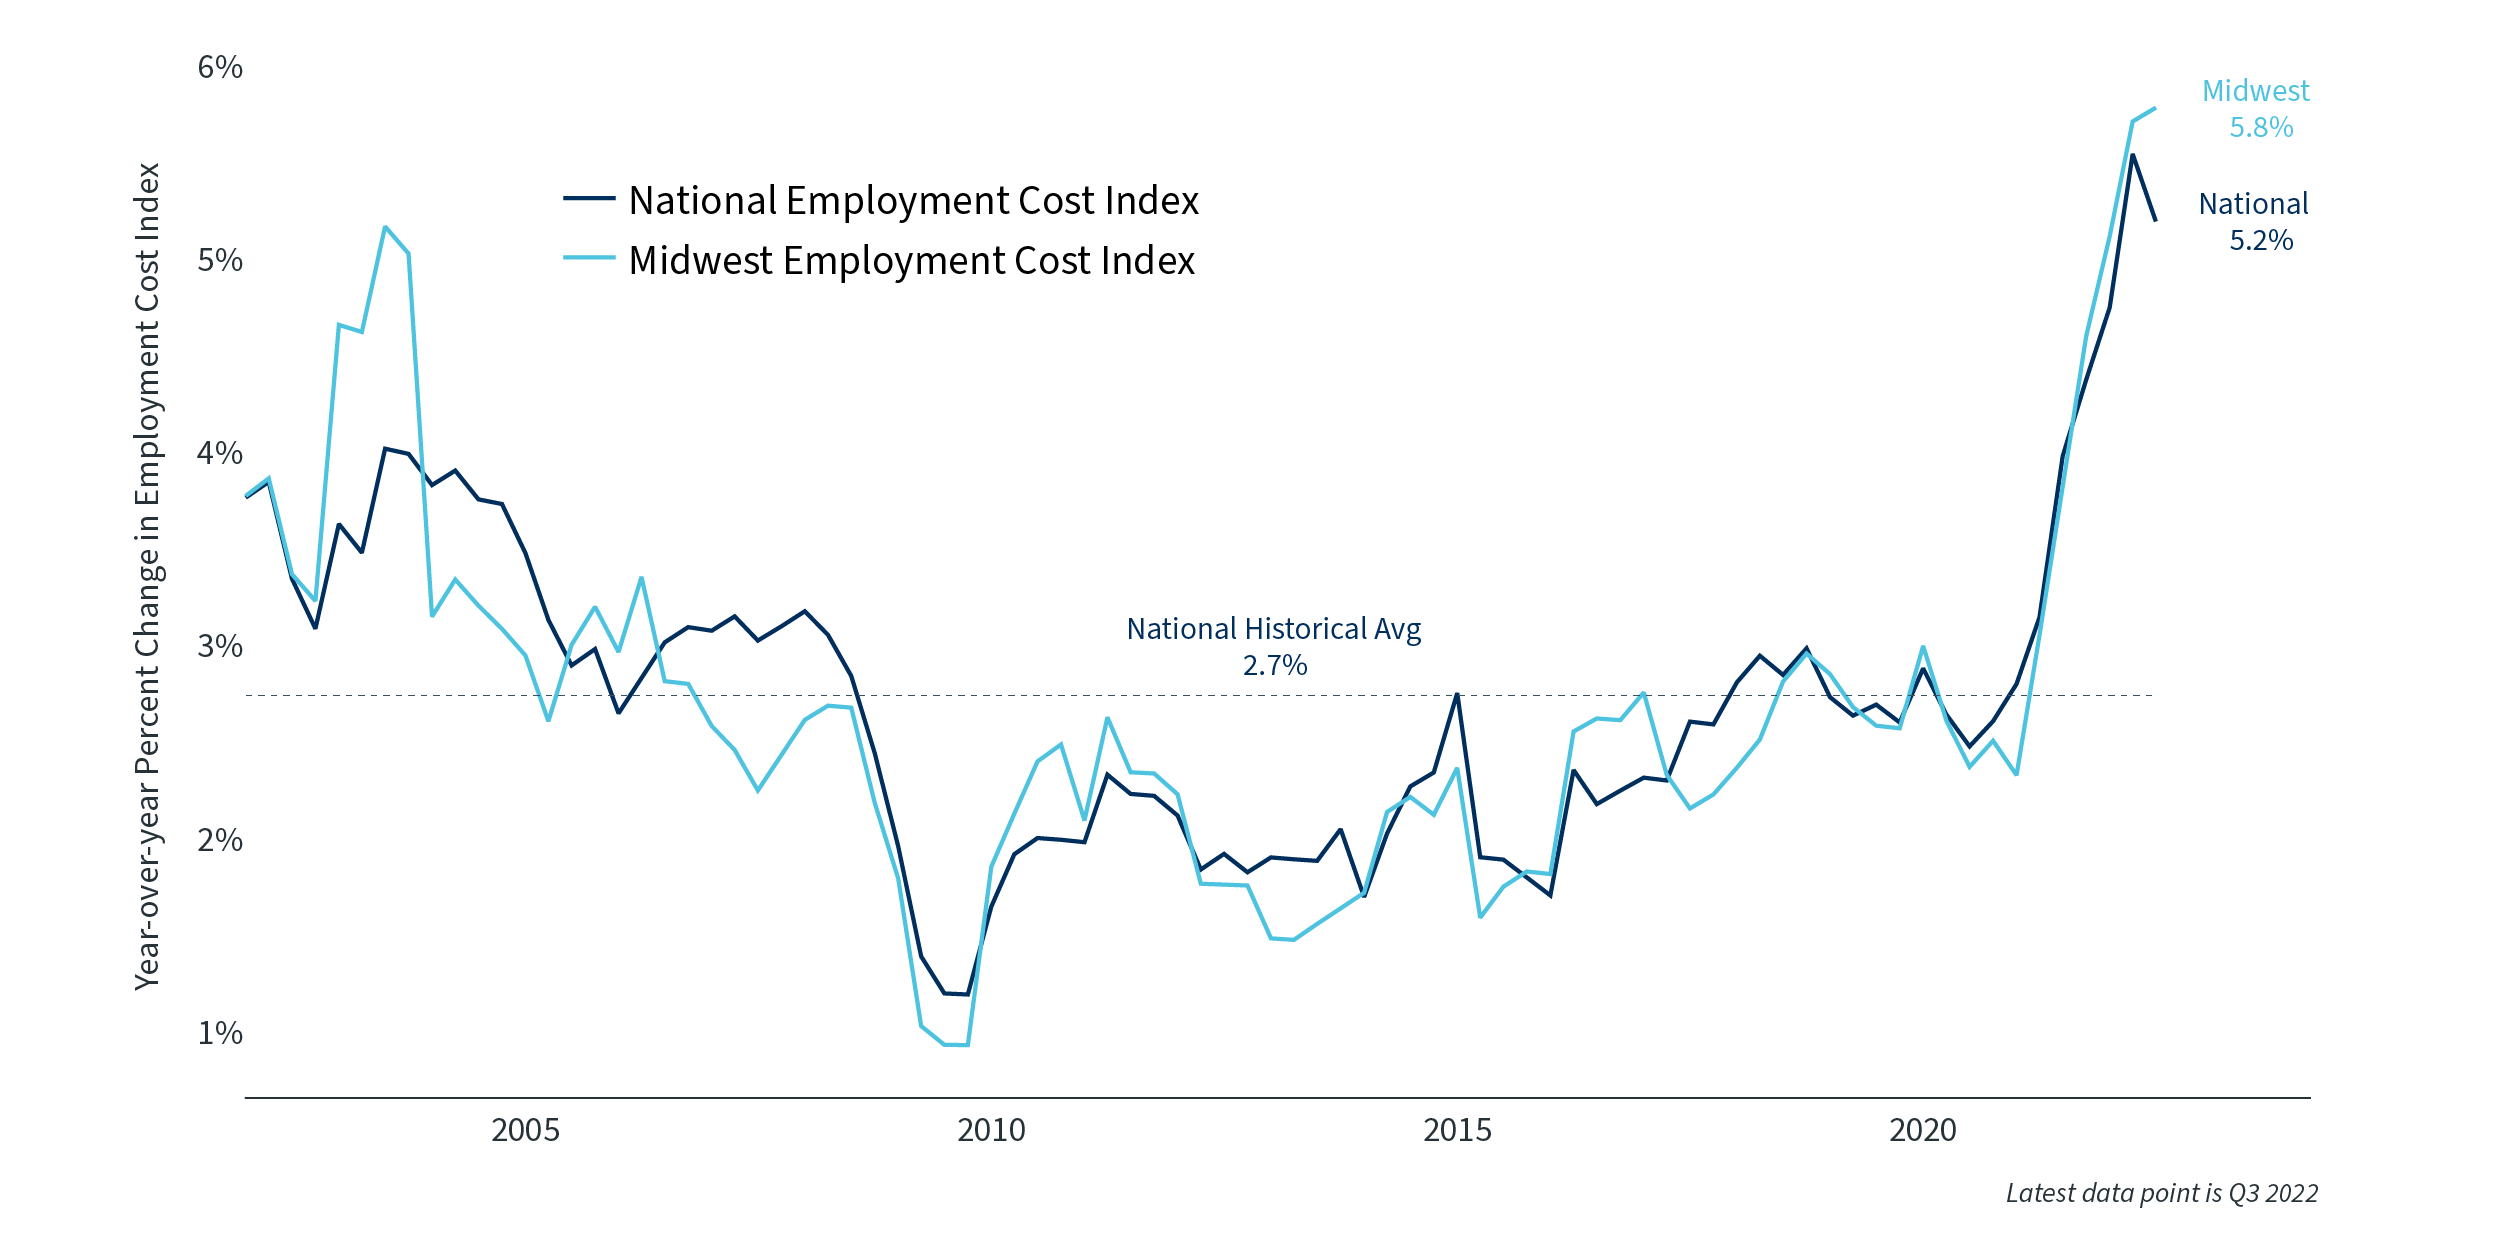 Image > Eployment Cost Index